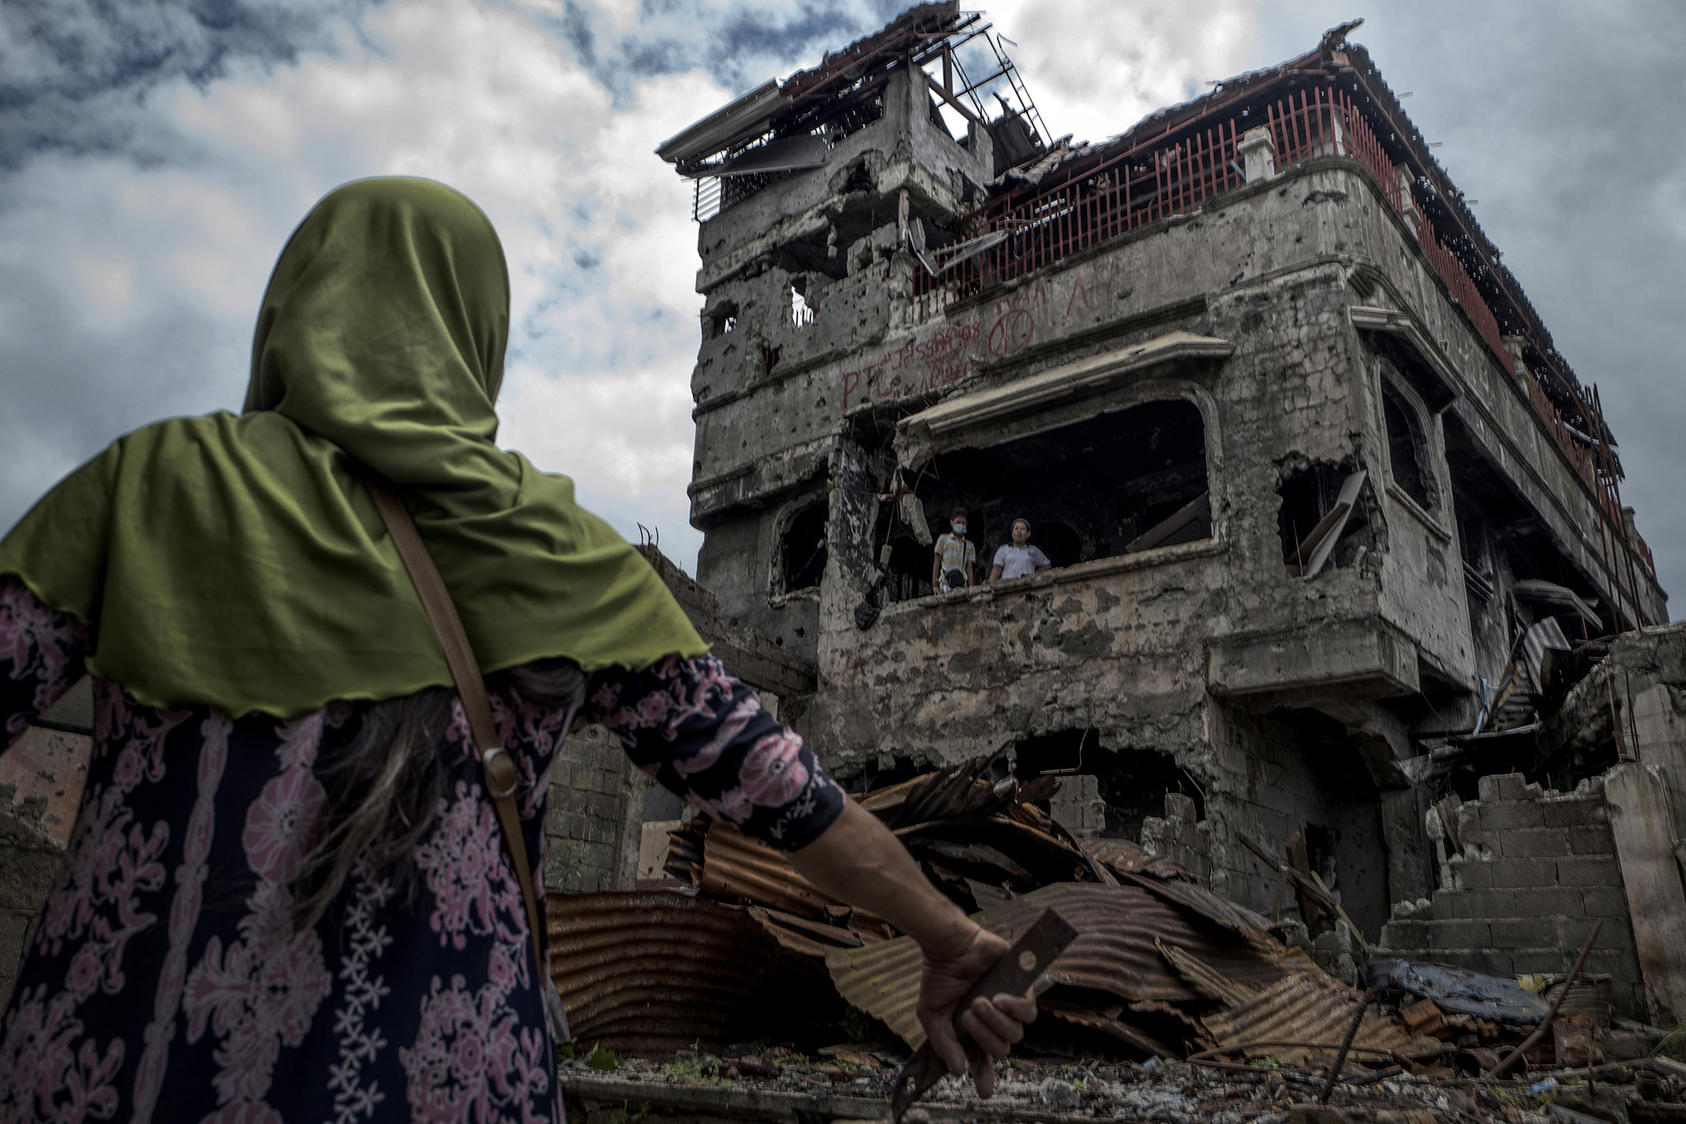 Residents return briefly to examine the wreckage of their home in Marawi, a city in the southern Philippines. April 8, 2018. (Jes Aznar/The New York Times)